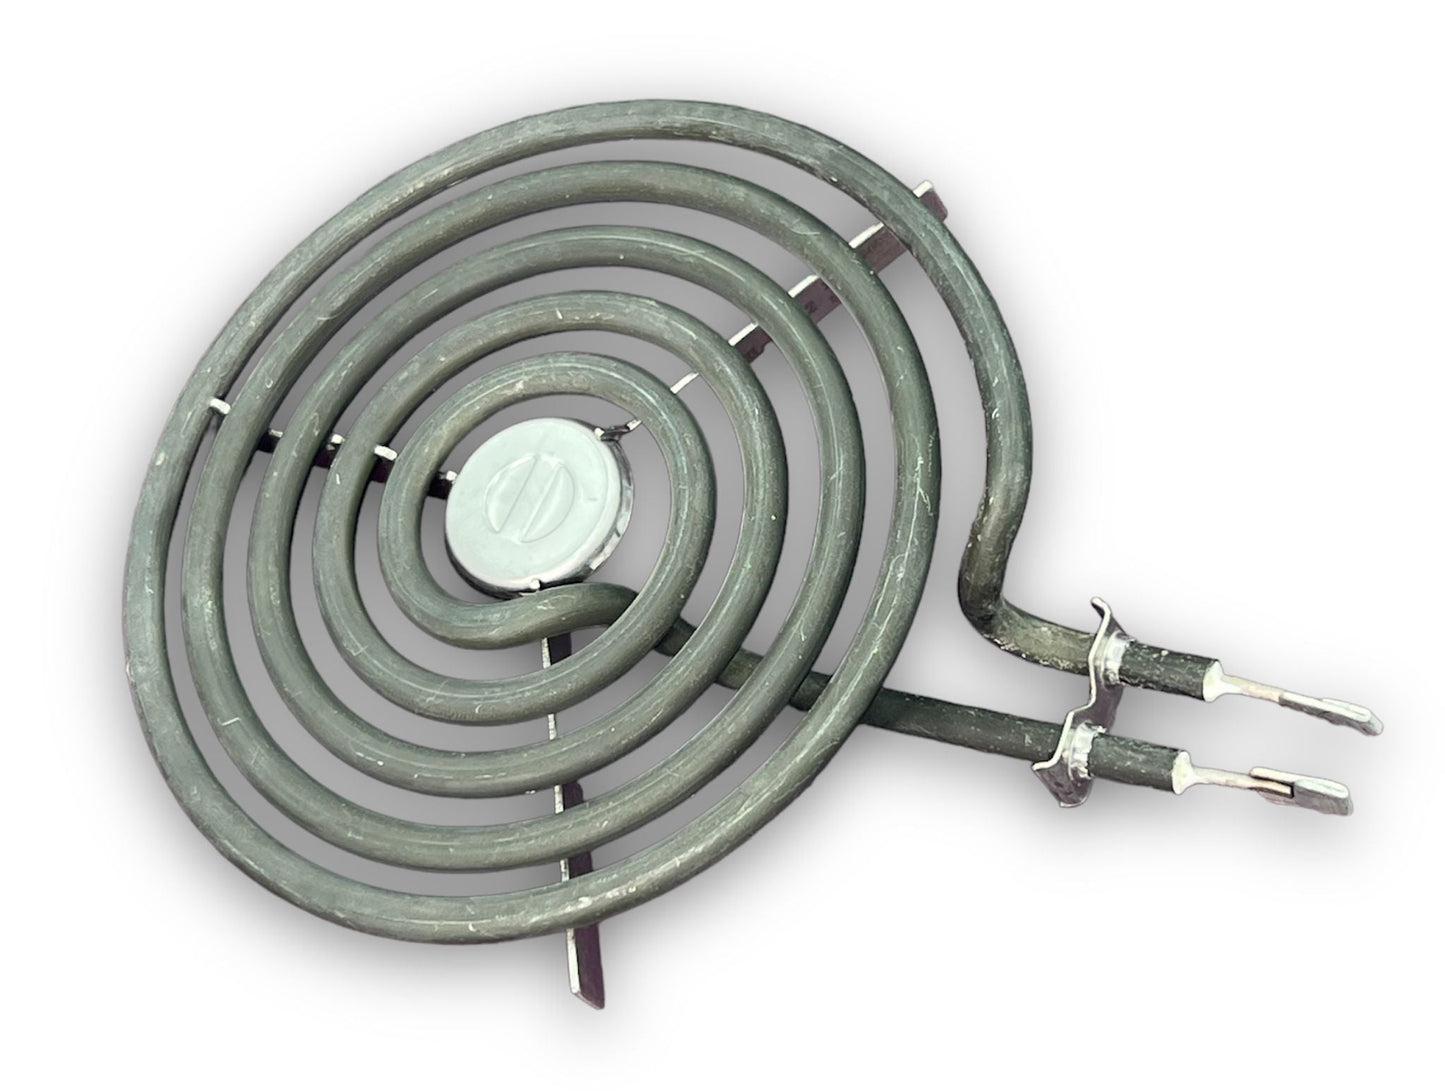 GE Range Coil Surface Burner 6"- WB30X0256,  Replaces: WB30X256  WB30X0247 WB30X0252 WB30X10013 WB30X10015 WB30X5079 INVERTEC